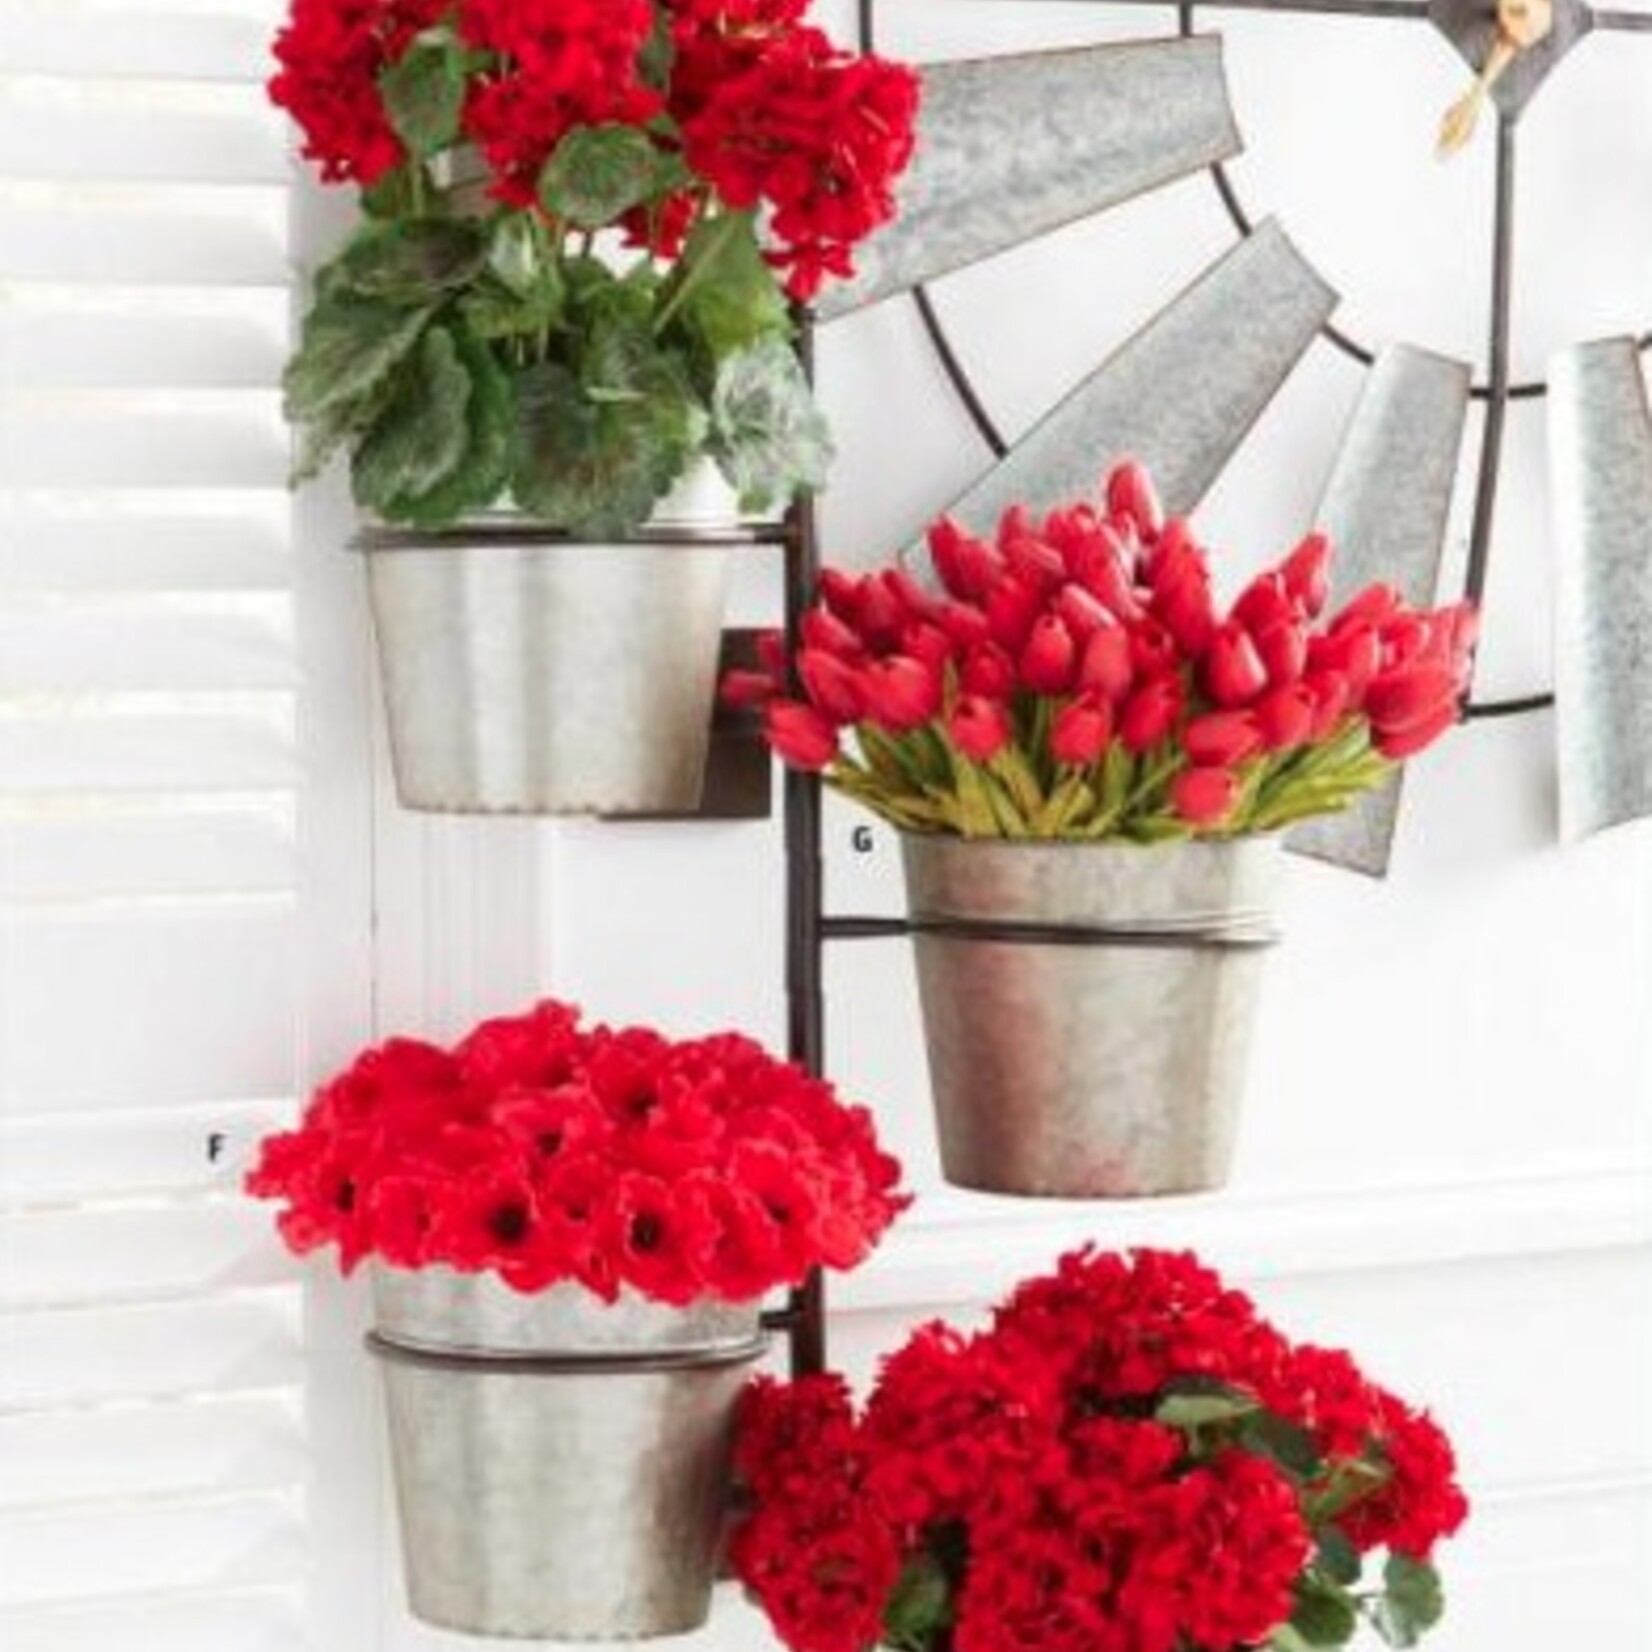 K & K Interiors 10.5" Red Real Touch Mini Tulip Stem